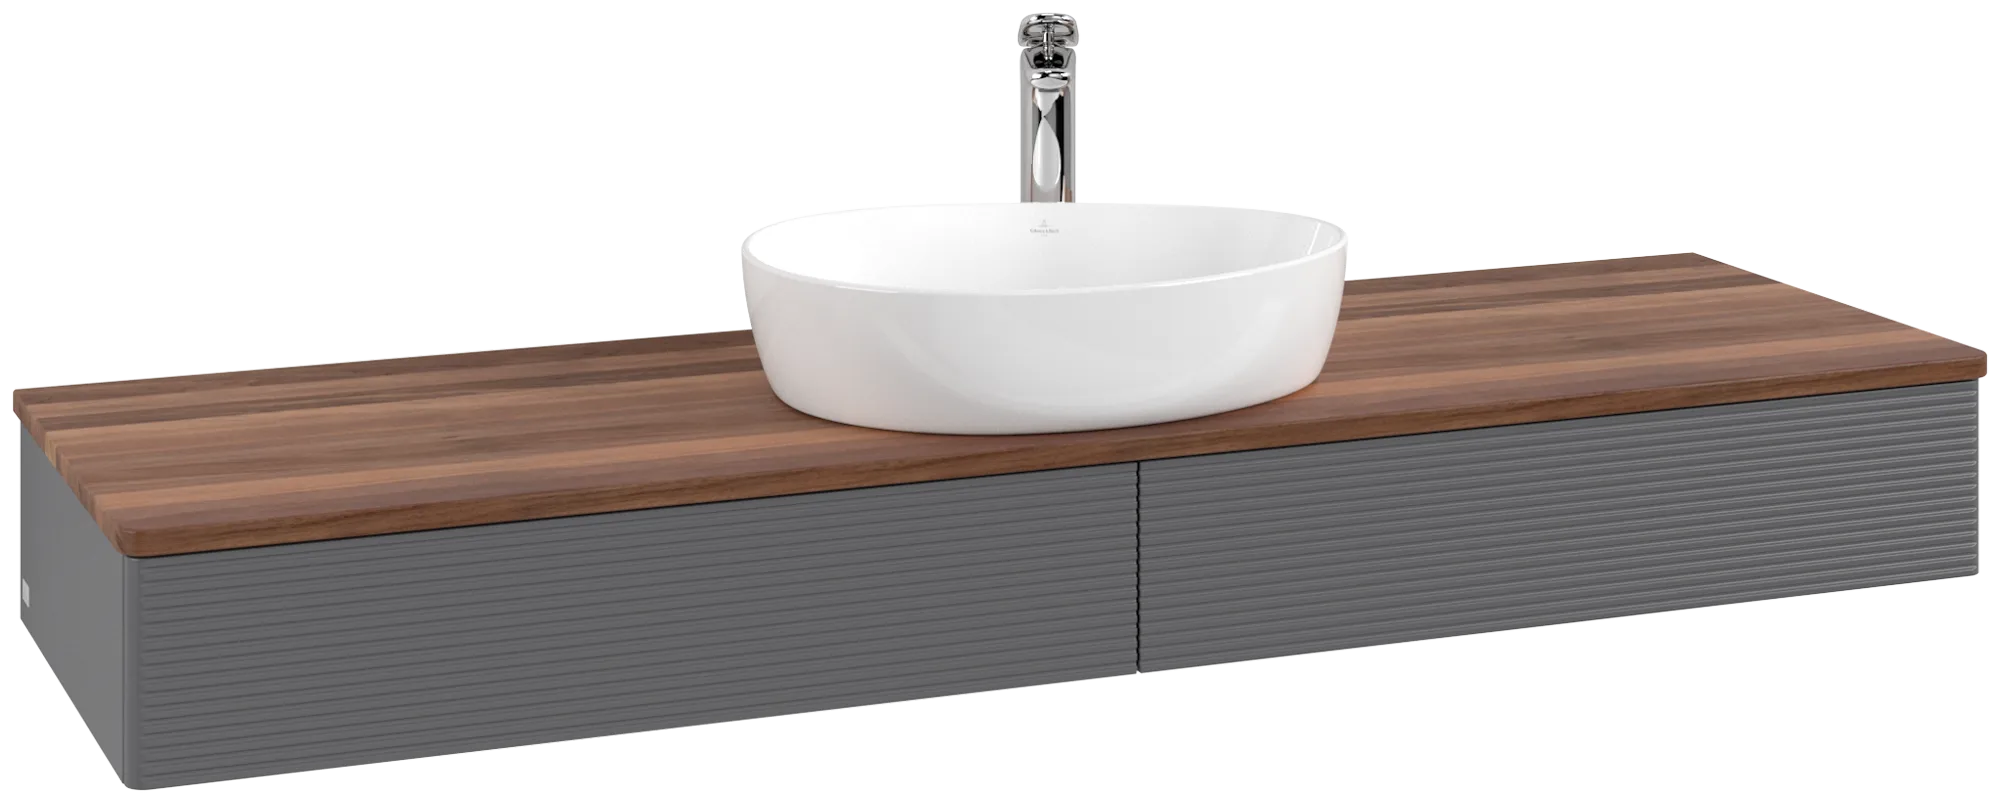 Obrázek VILLEROY BOCH Antao Vanity unit, with lighting, 2 pull-out compartments, 1600 x 190 x 500 mm, Front with grain texture, Anthracite Matt Lacquer / Warm Walnut #L14152GK